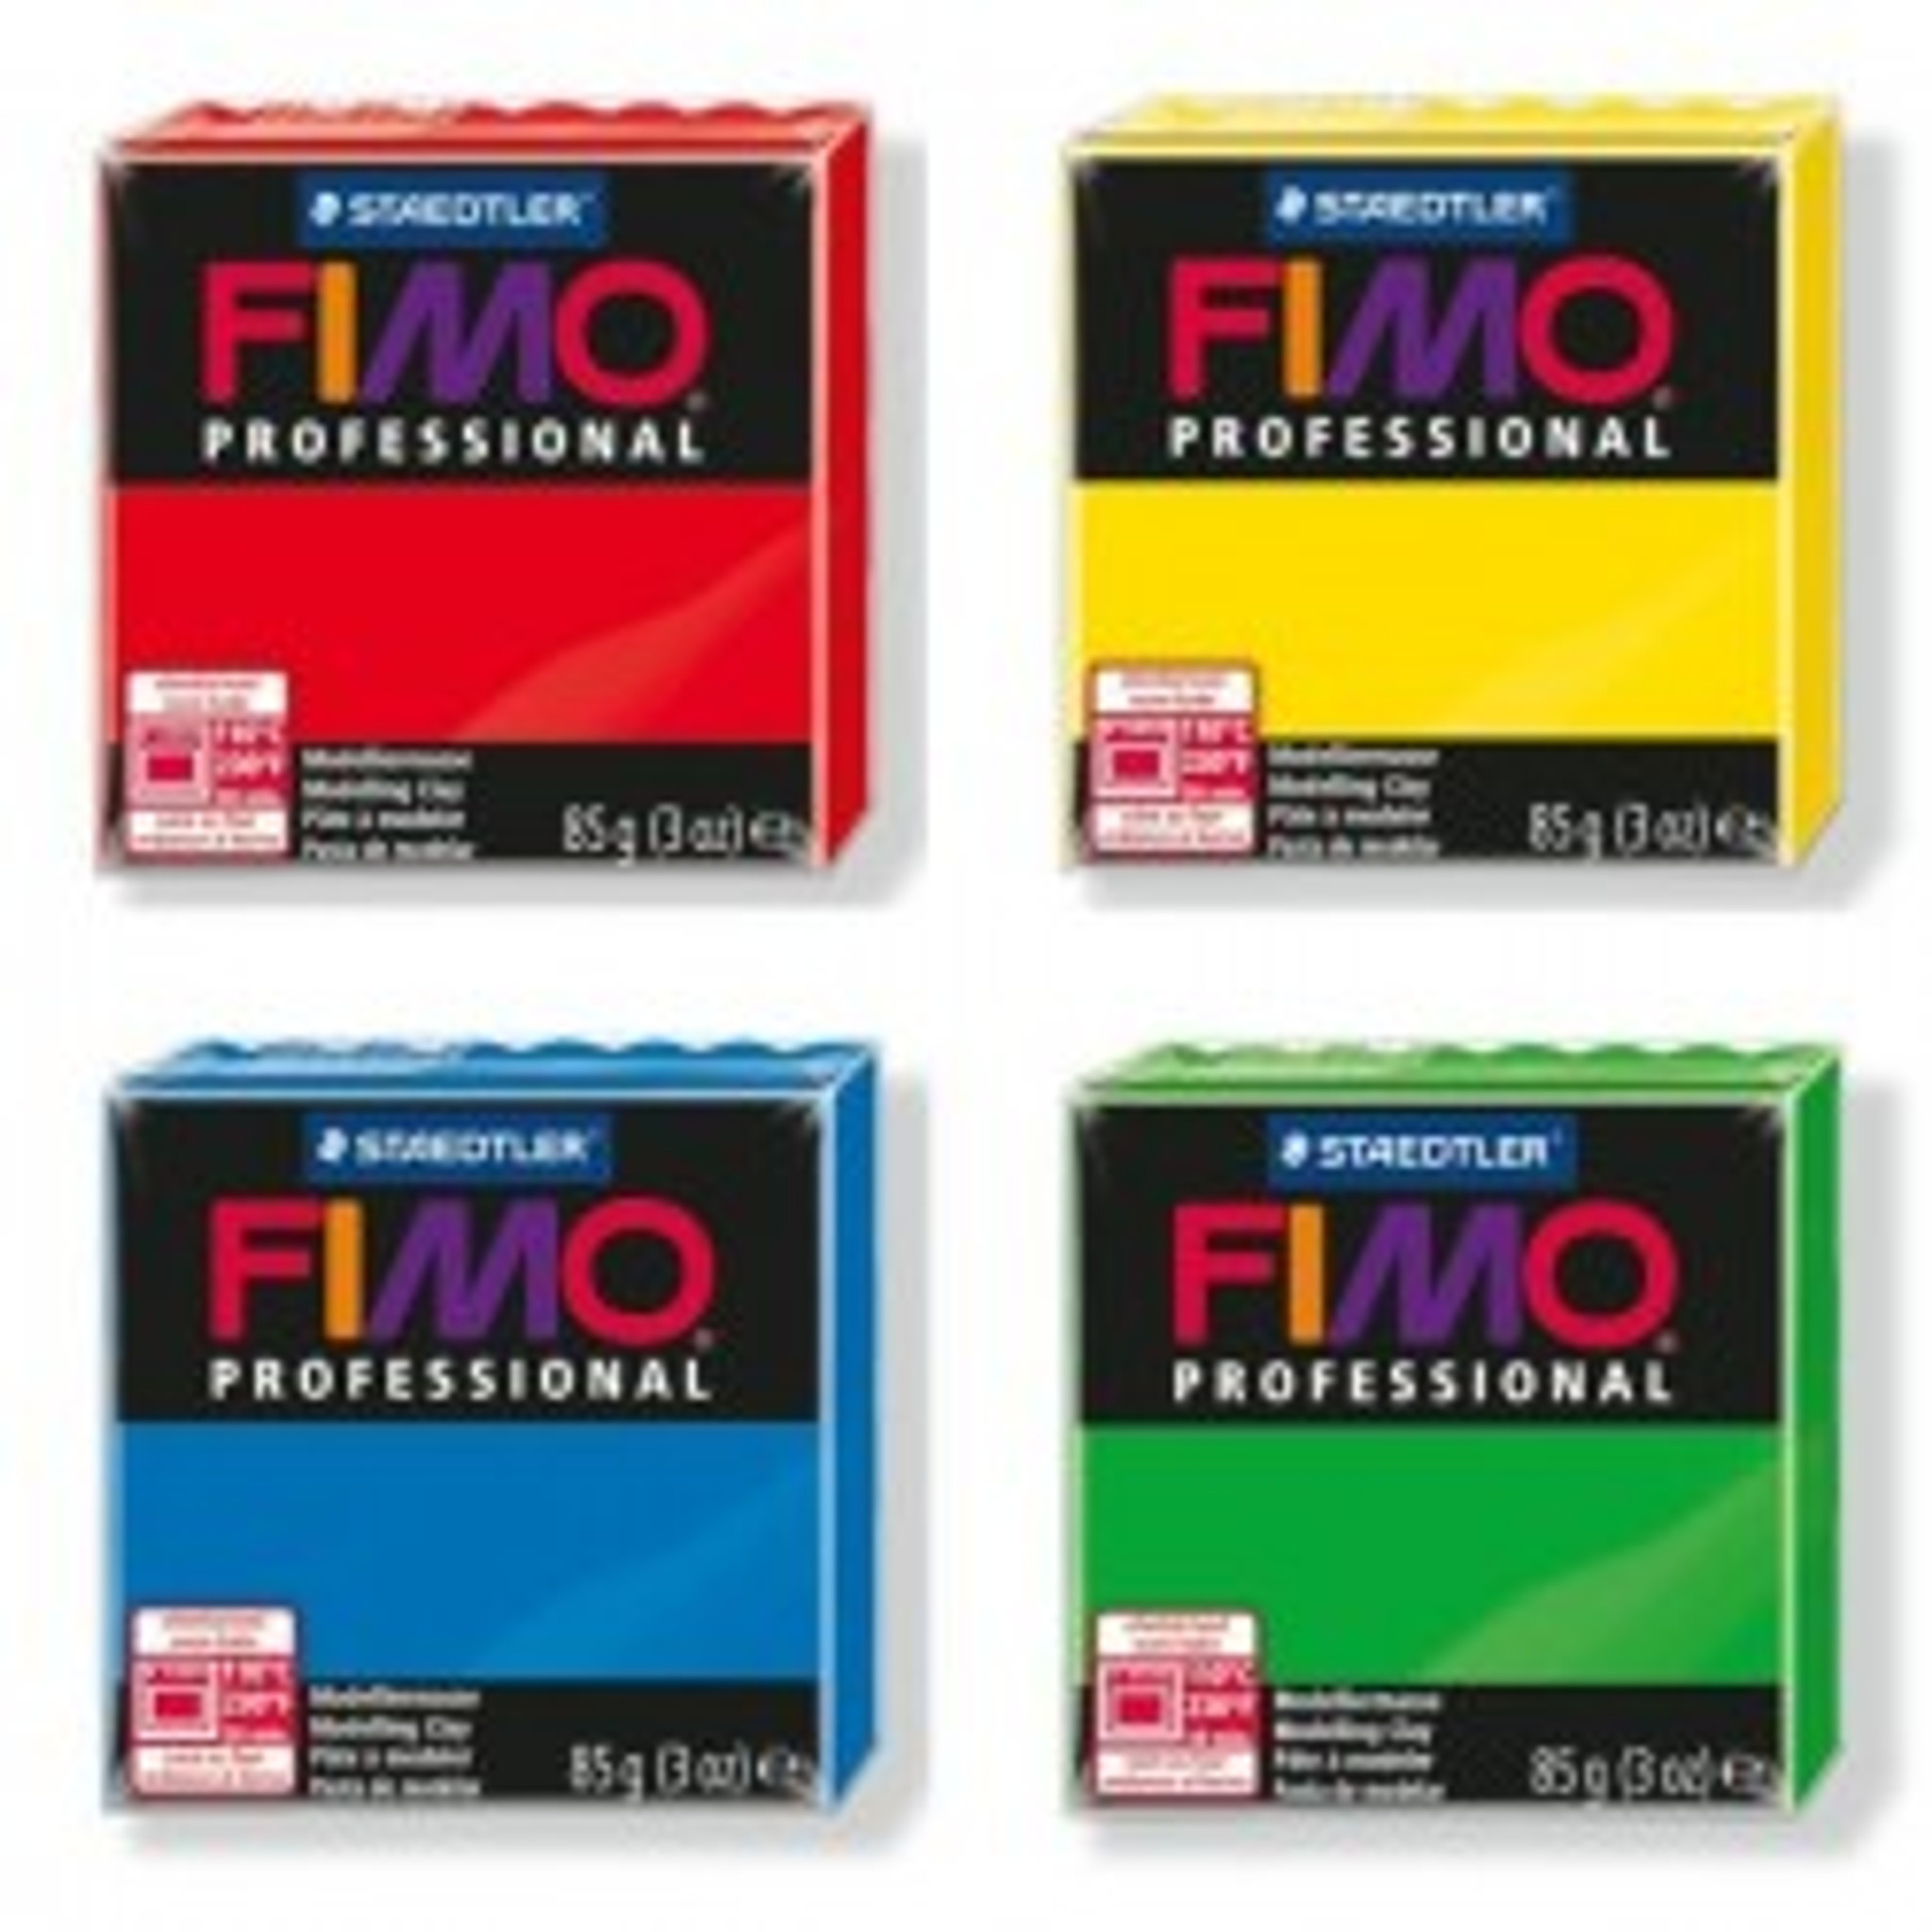 FIMO Effect Modelling Clay Professional Set 12 x 57g 7 Pro Moulding Instruments